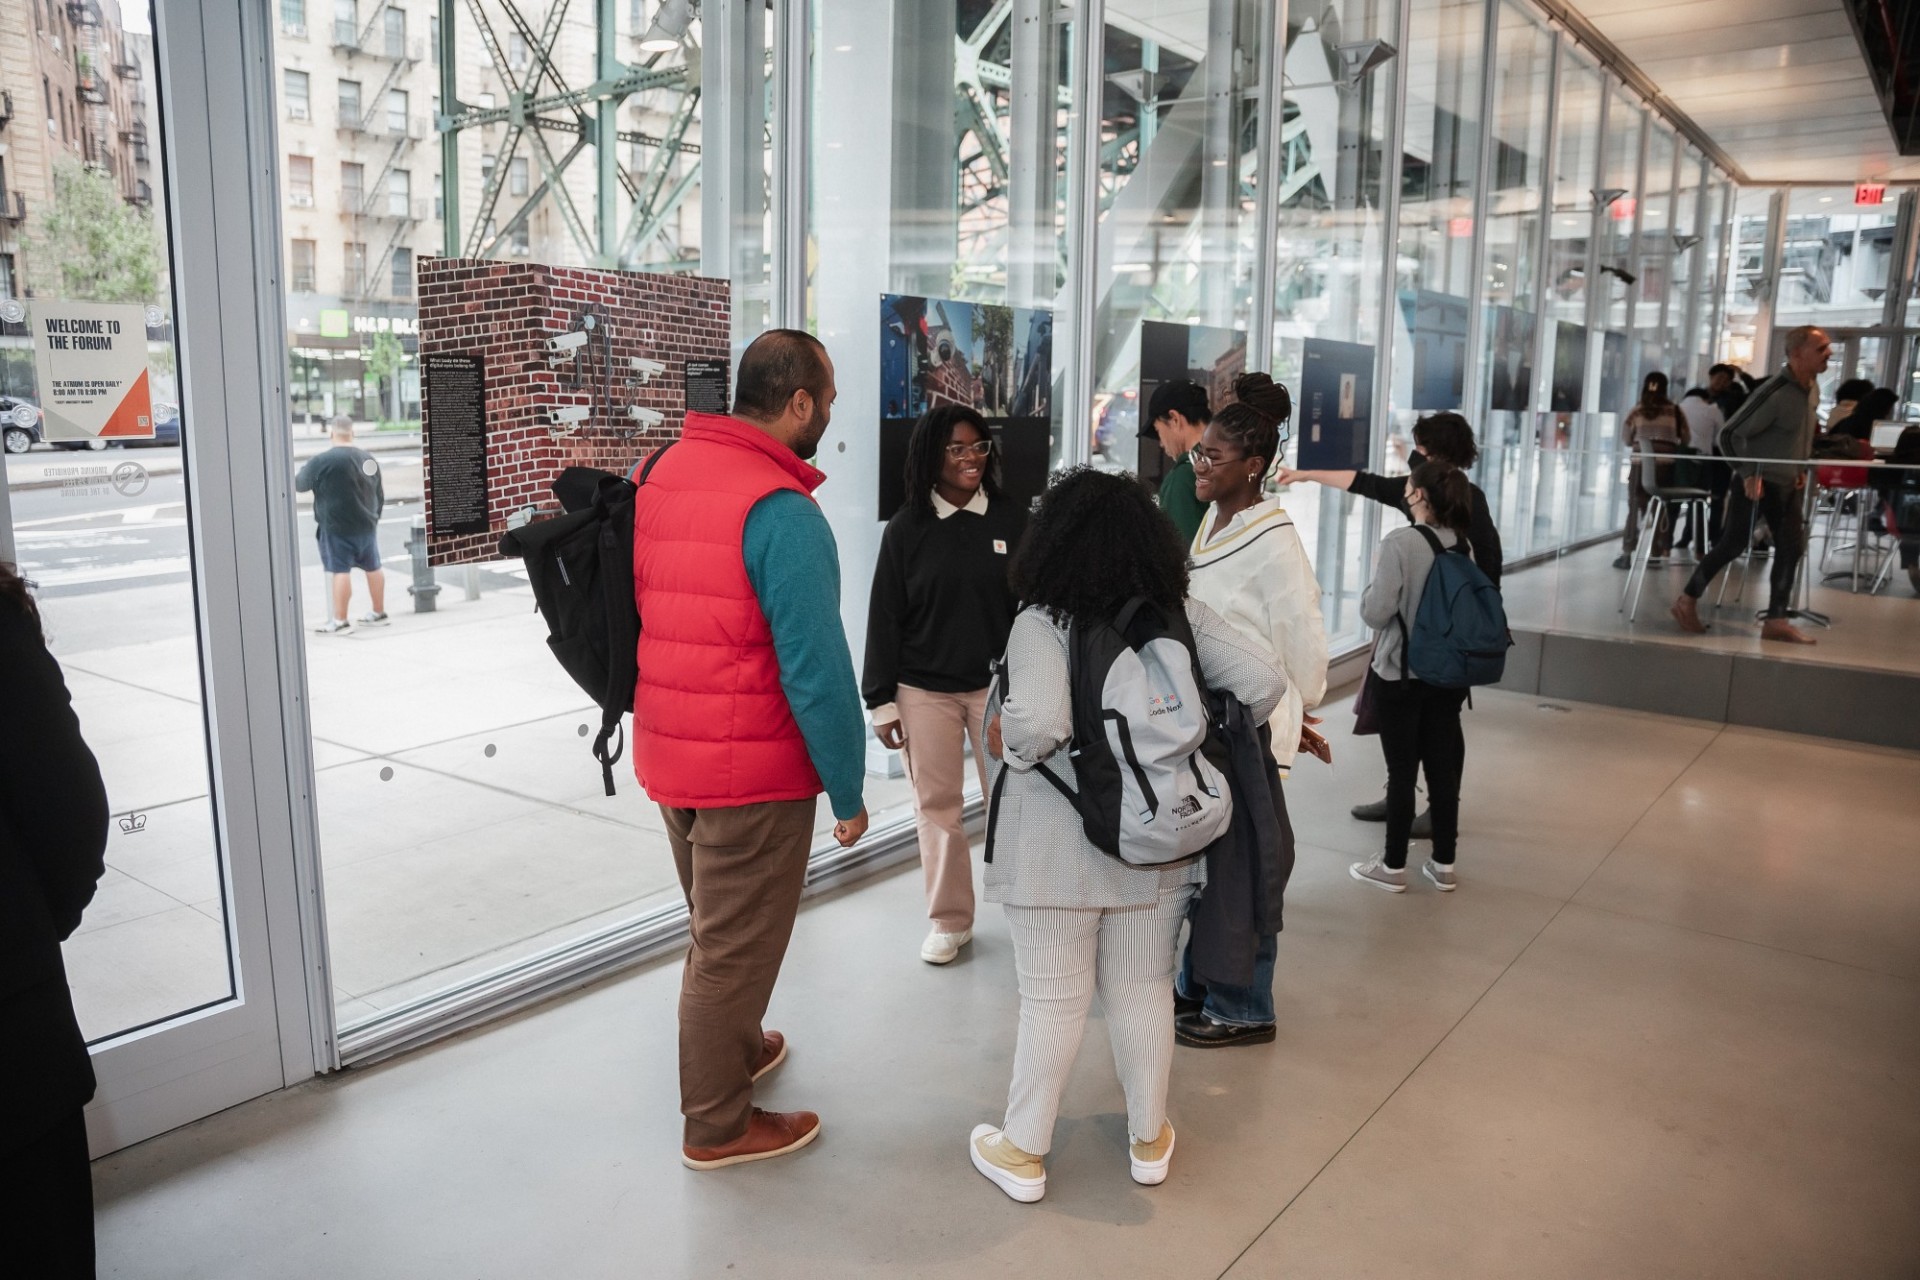 Group of students in conversation in front of the photo exhibit they helped create. Photo boards are hung in the building's windows as visitors look on.  